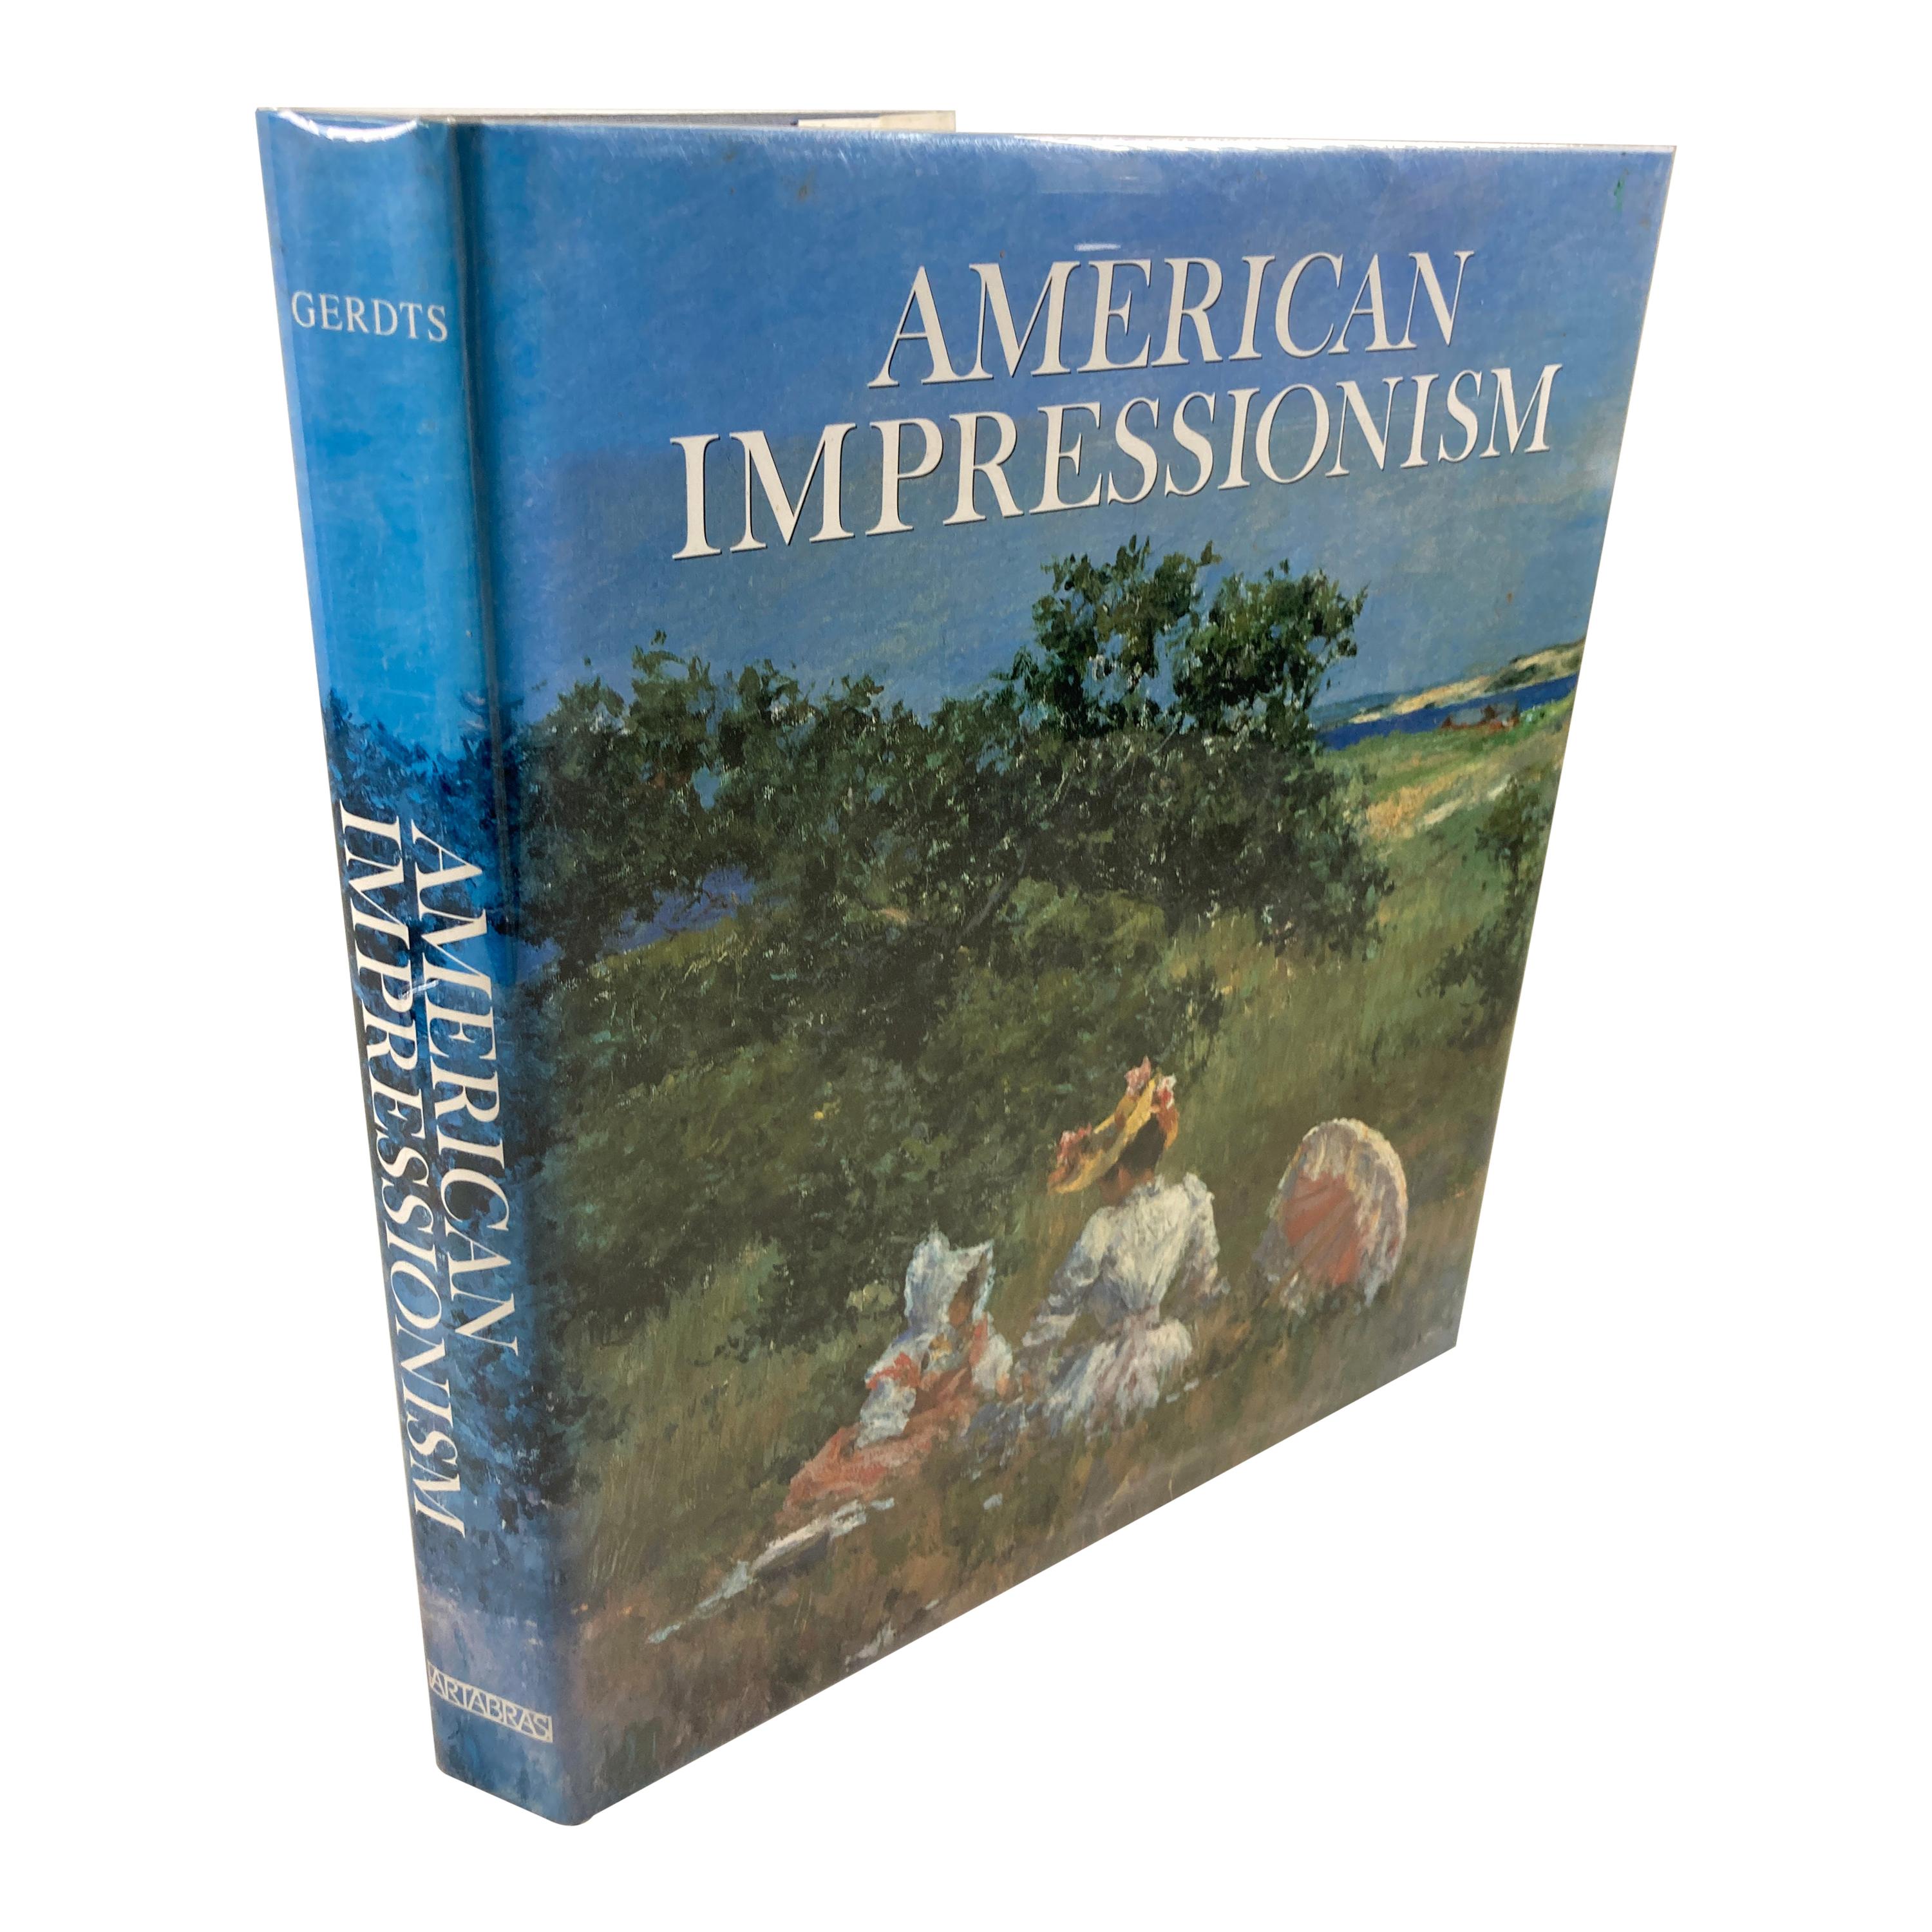 American Impressionism Hardcover Book by William H. Gerdts